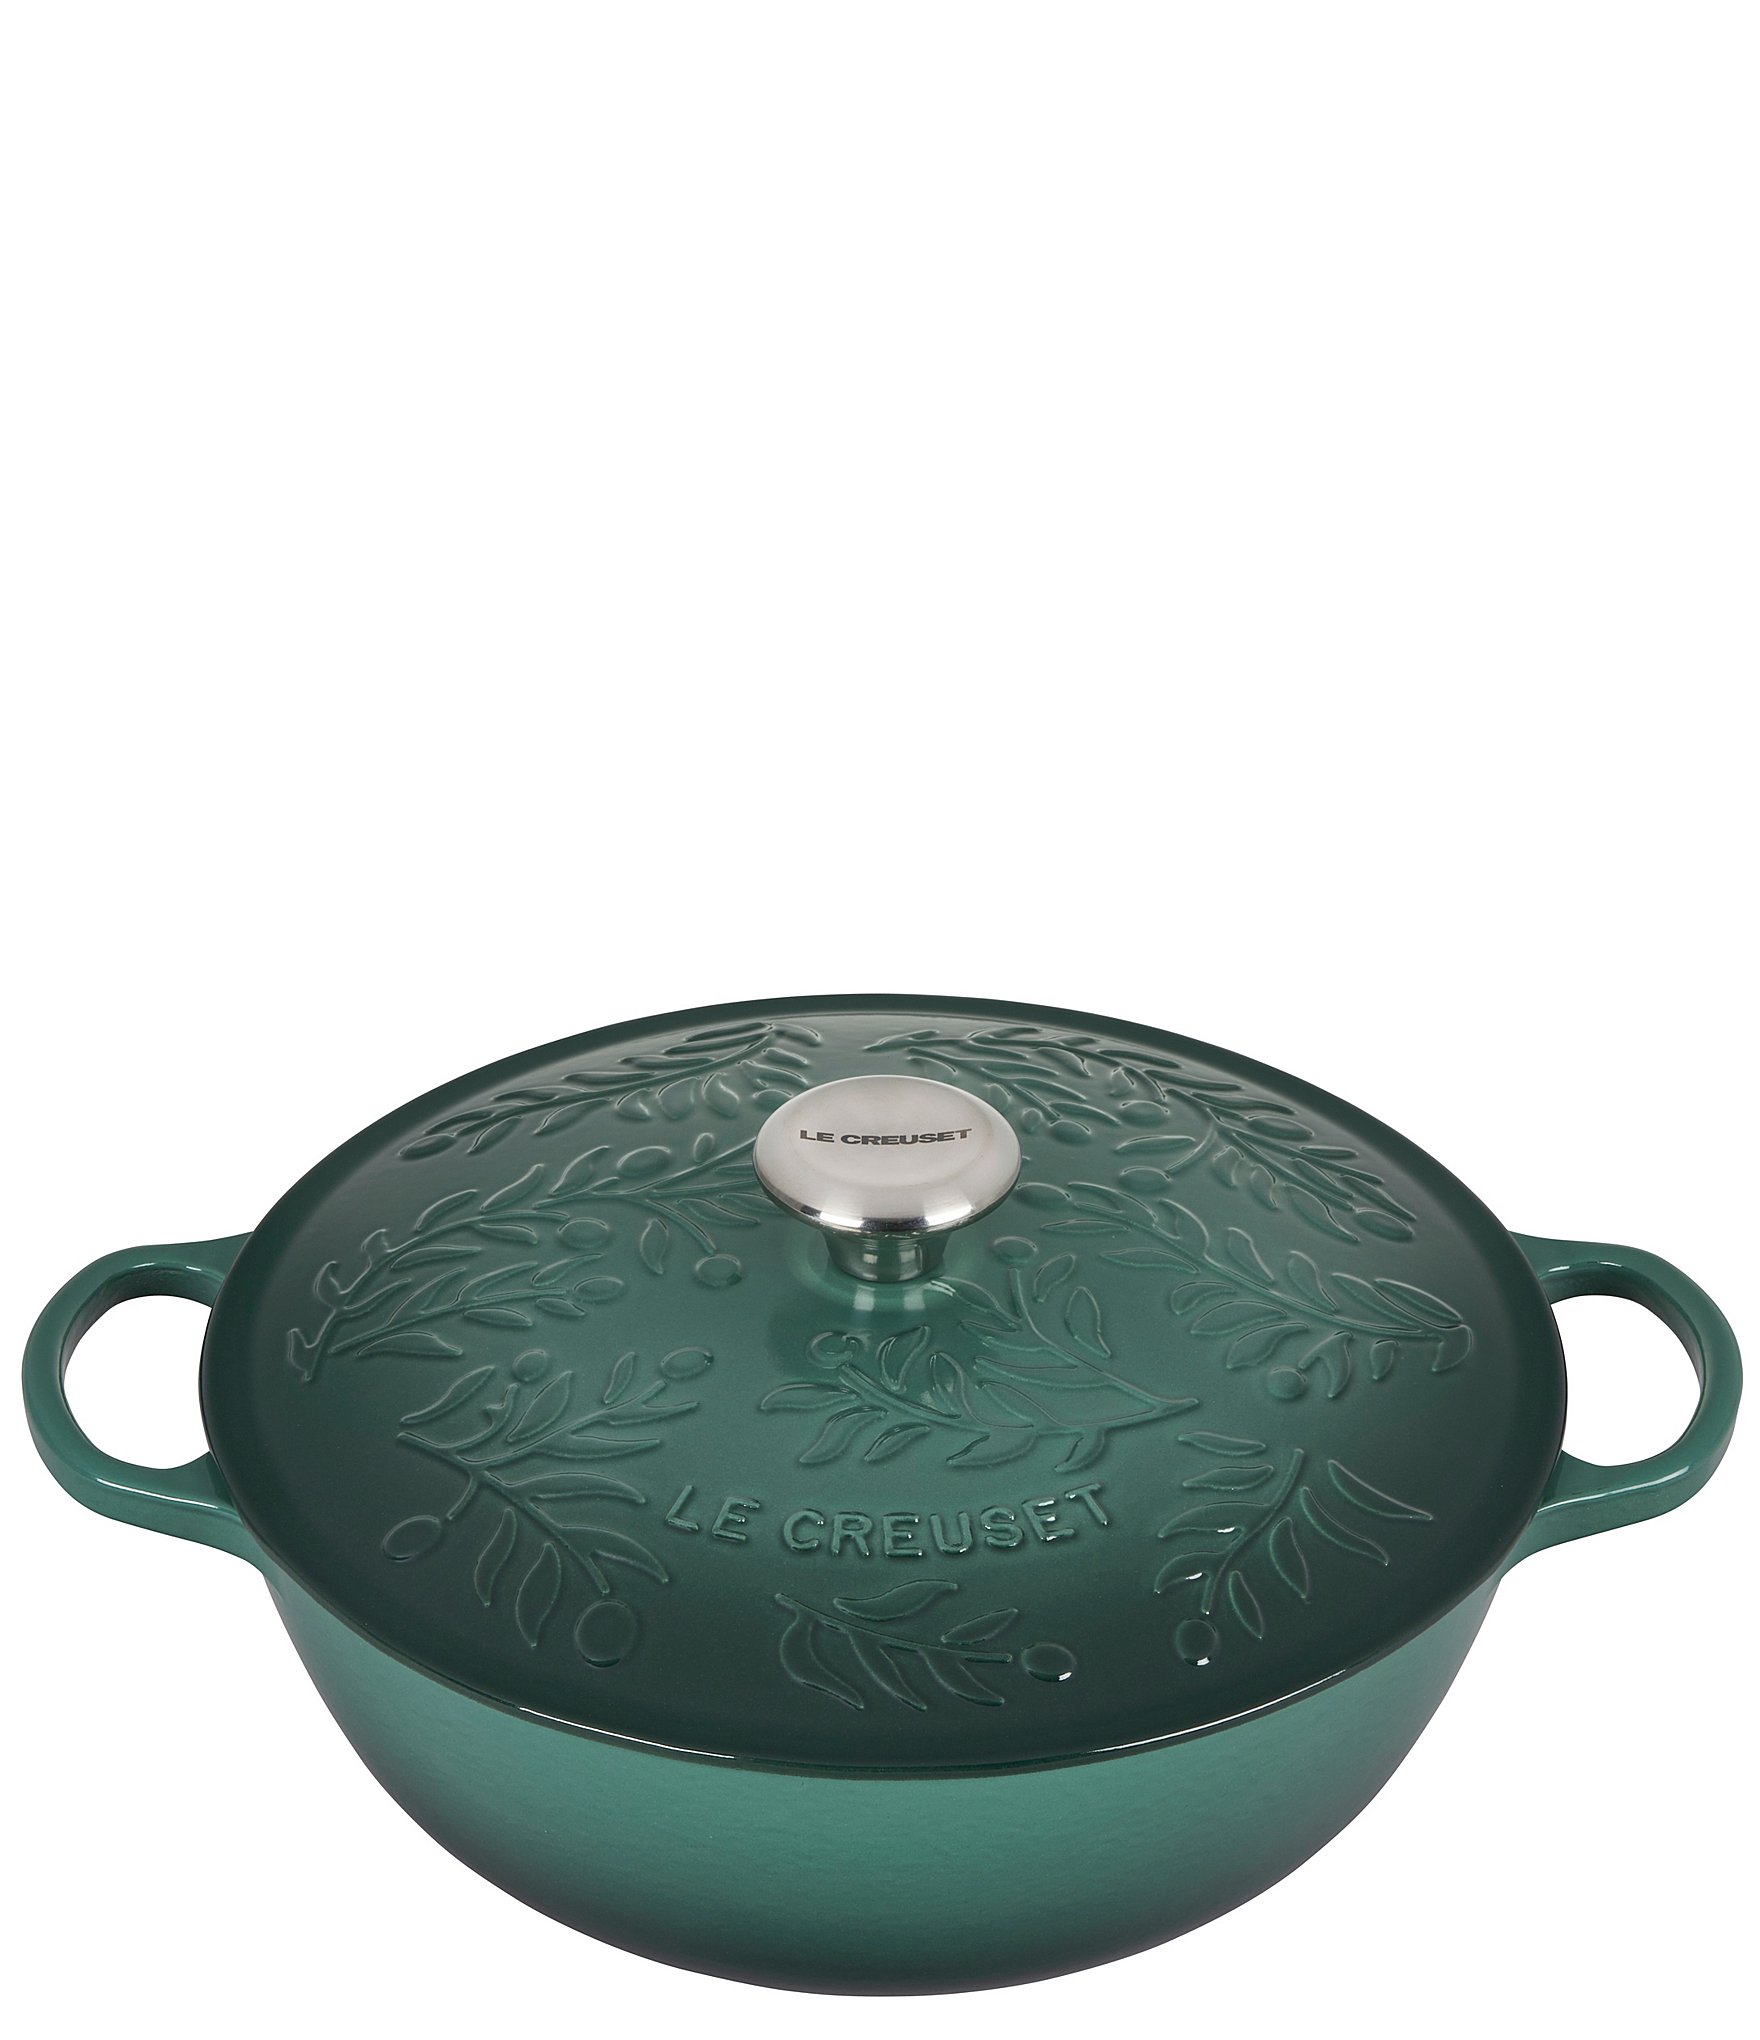 https://dimg.dillards.com/is/image/DillardsZoom/zoom/le-creuset-olive-branch-collection-signature-soup-pot-with-stainless-steel-knob/00000000_zi_ccf58f2d-138e-4b6b-b458-dd7f044f4e4d.jpg